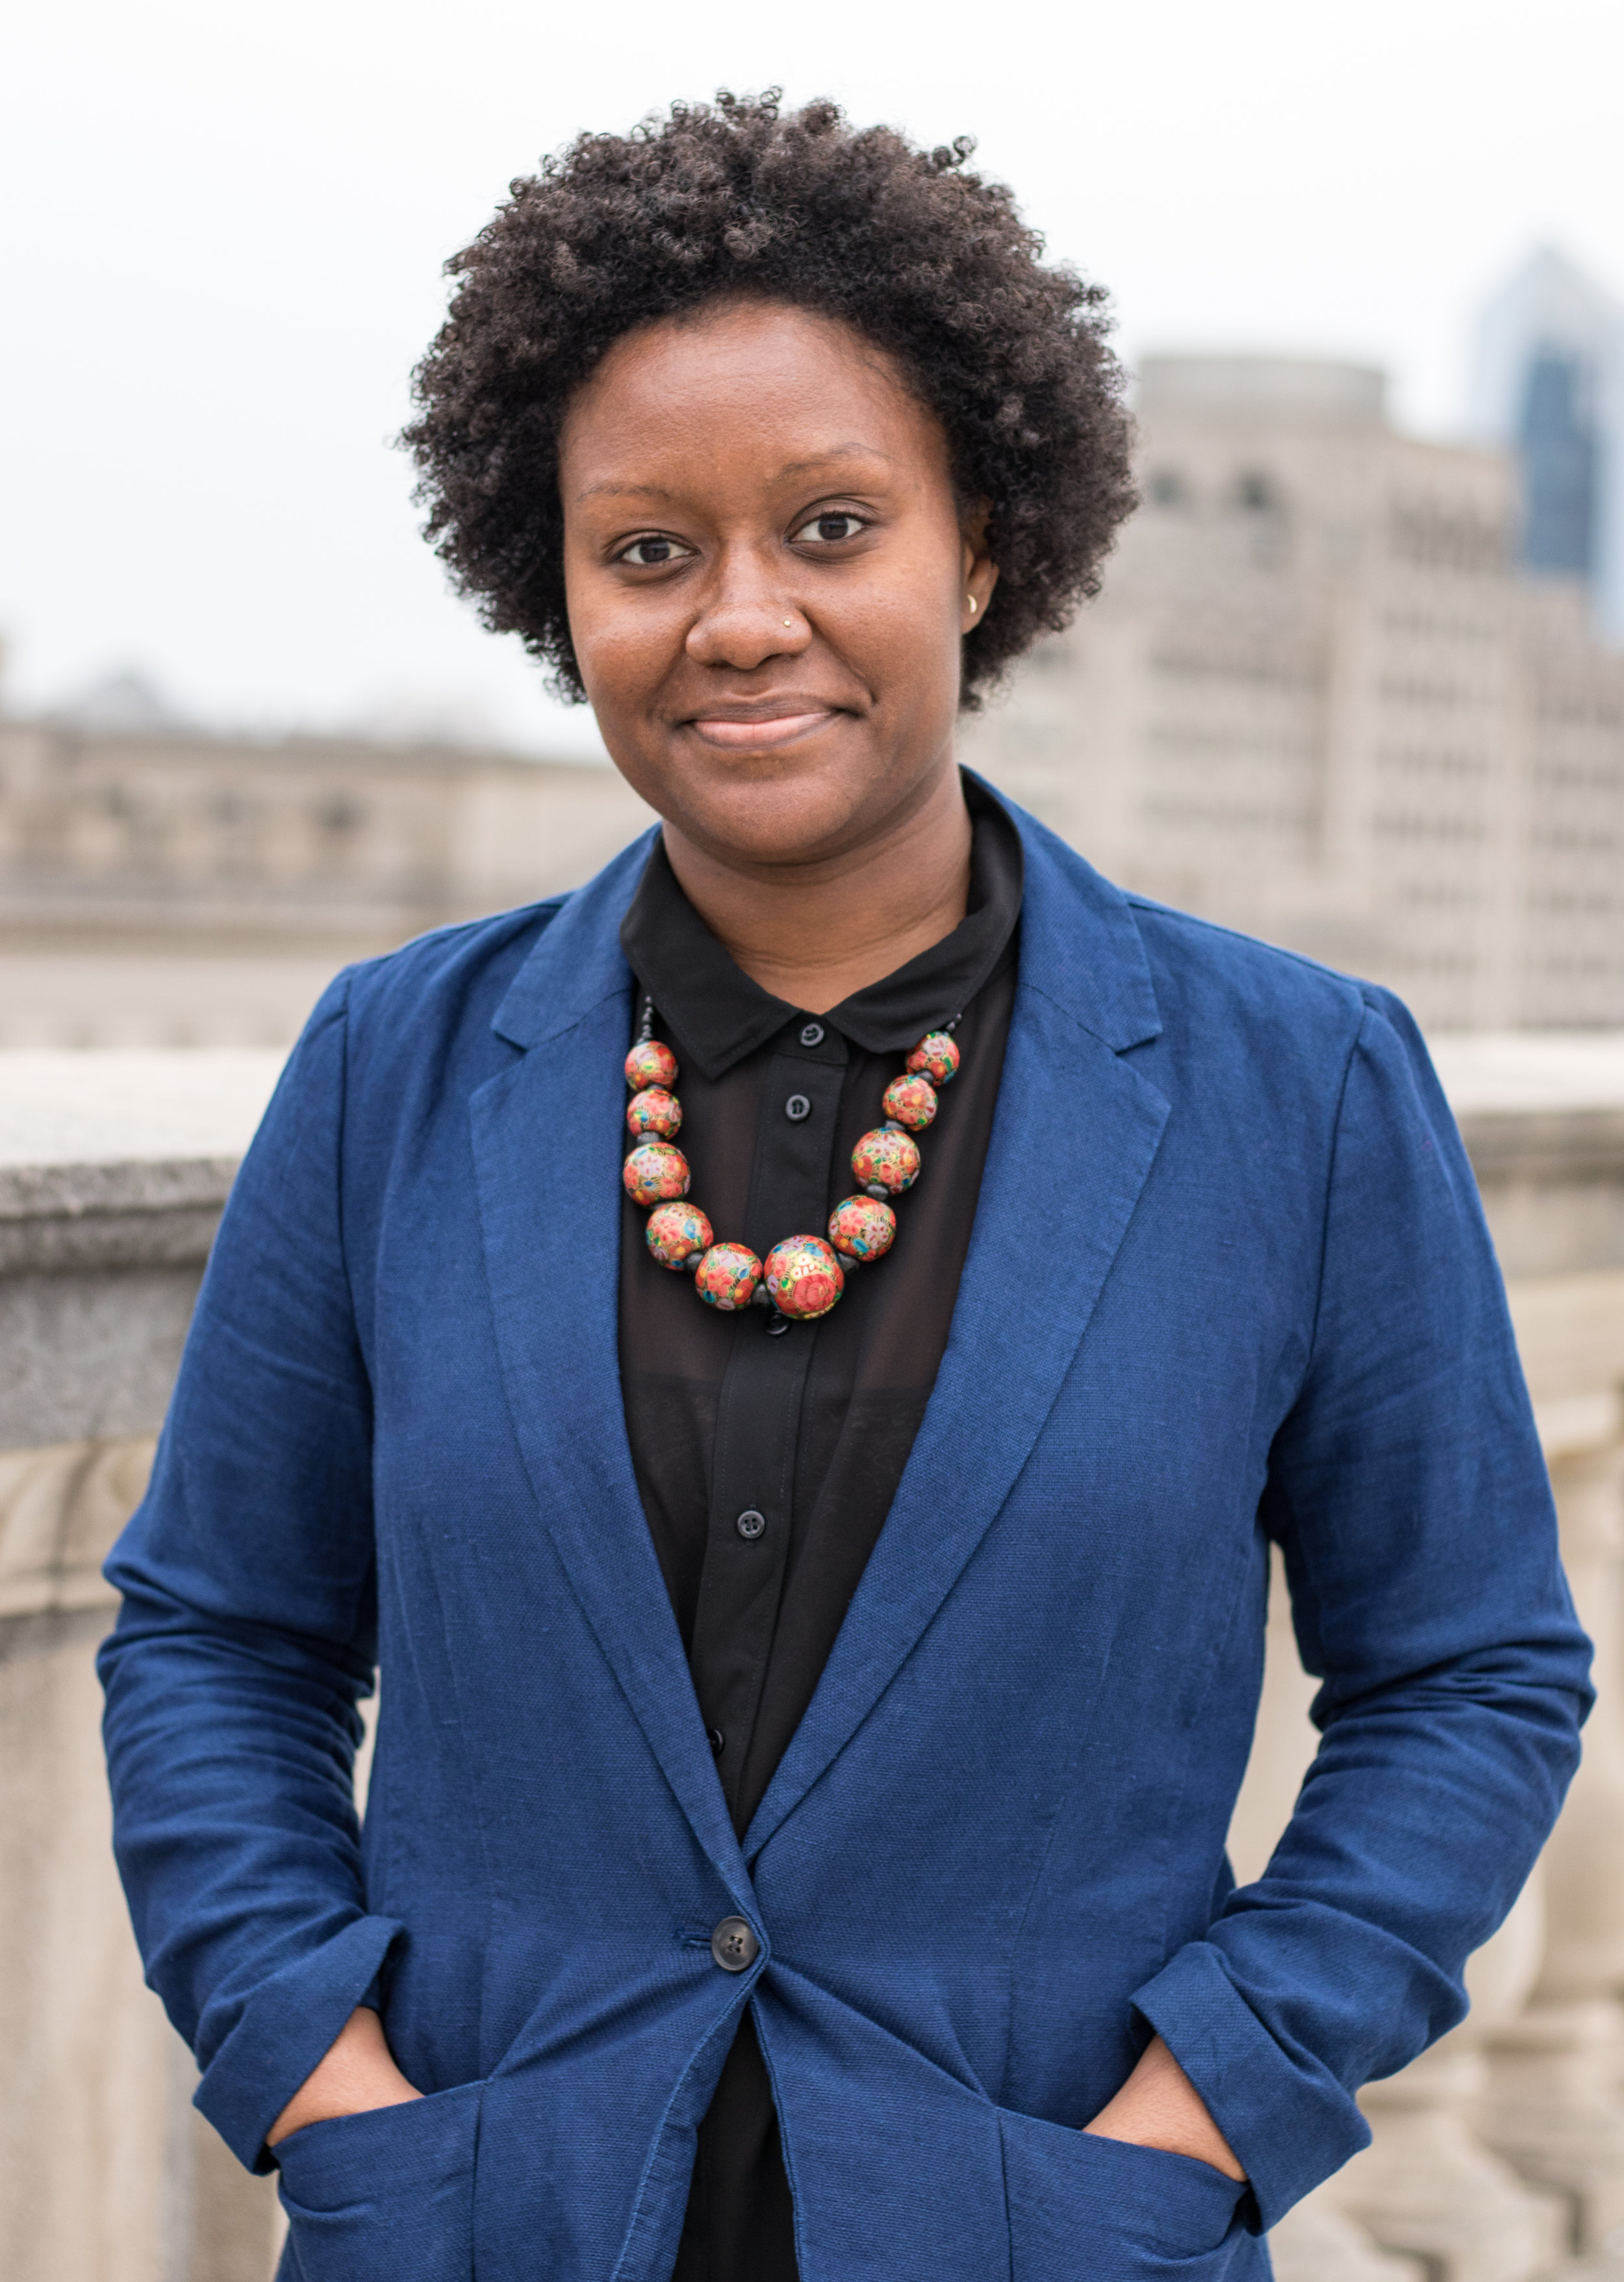 Alt text: a young black woman smiles at camera while wearing a blue blazer and black blouse along with a chunky, rounded wooden bead necklace. Her hands are in the blazer pockets. The background is bl